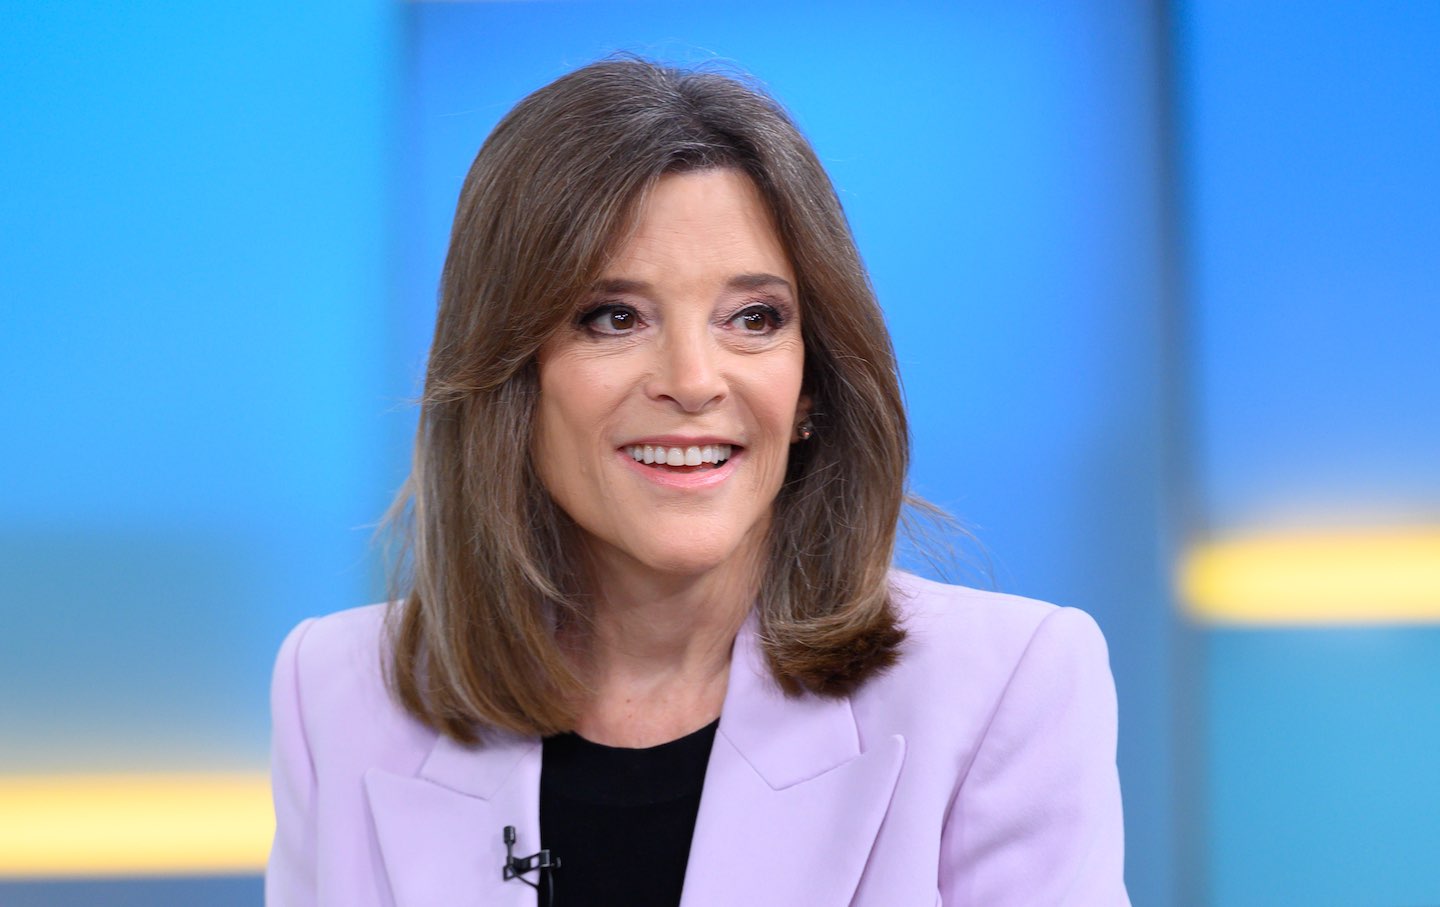 Marianne Williamson: “Anything Is Possible”